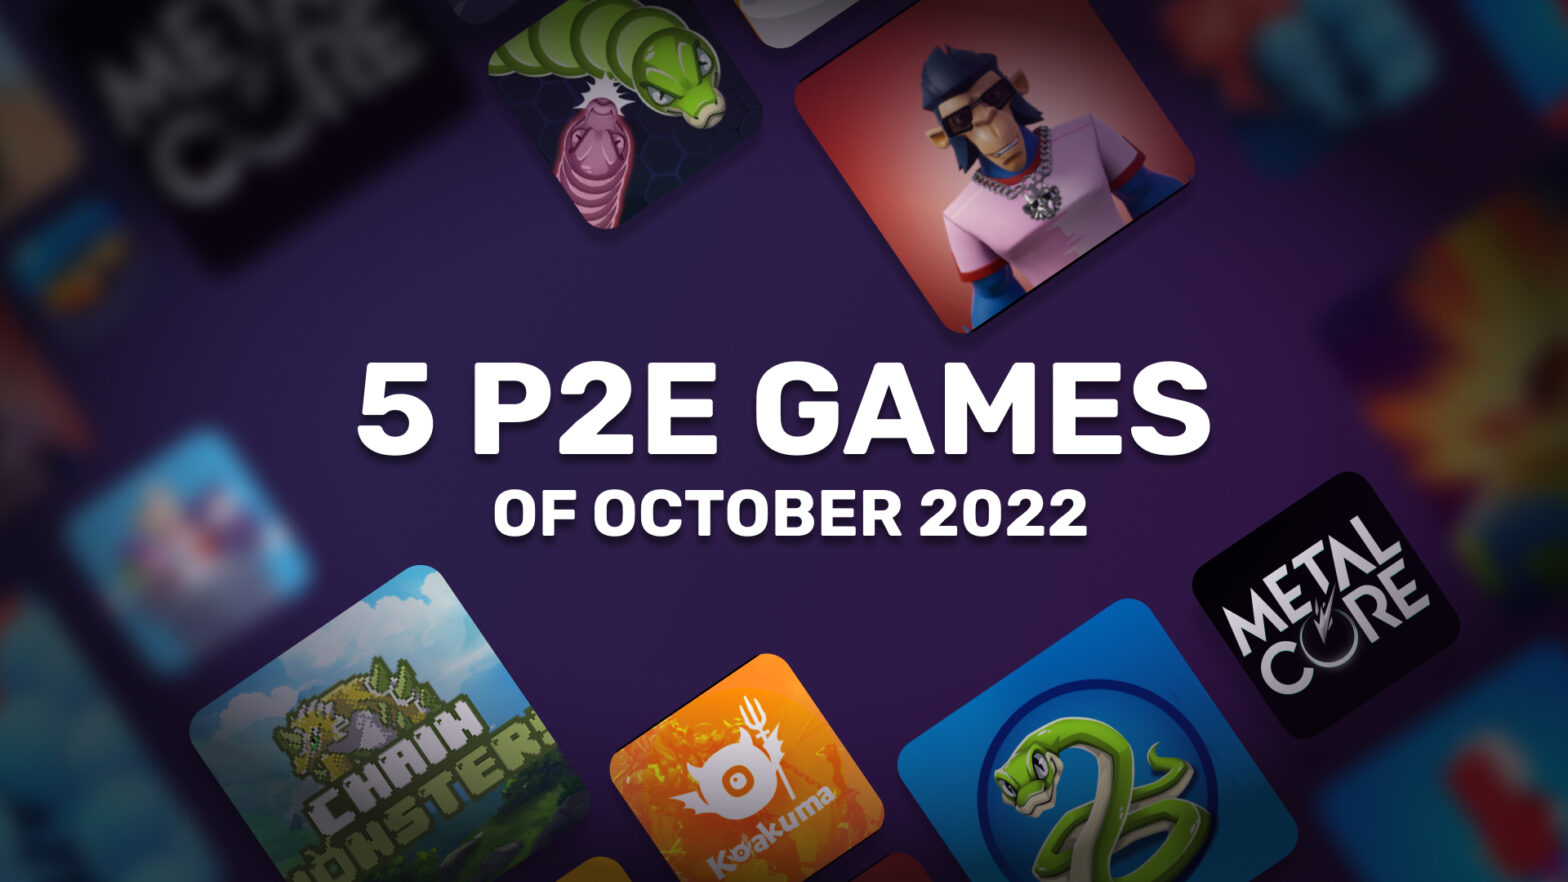 Five P2E games of October 2022